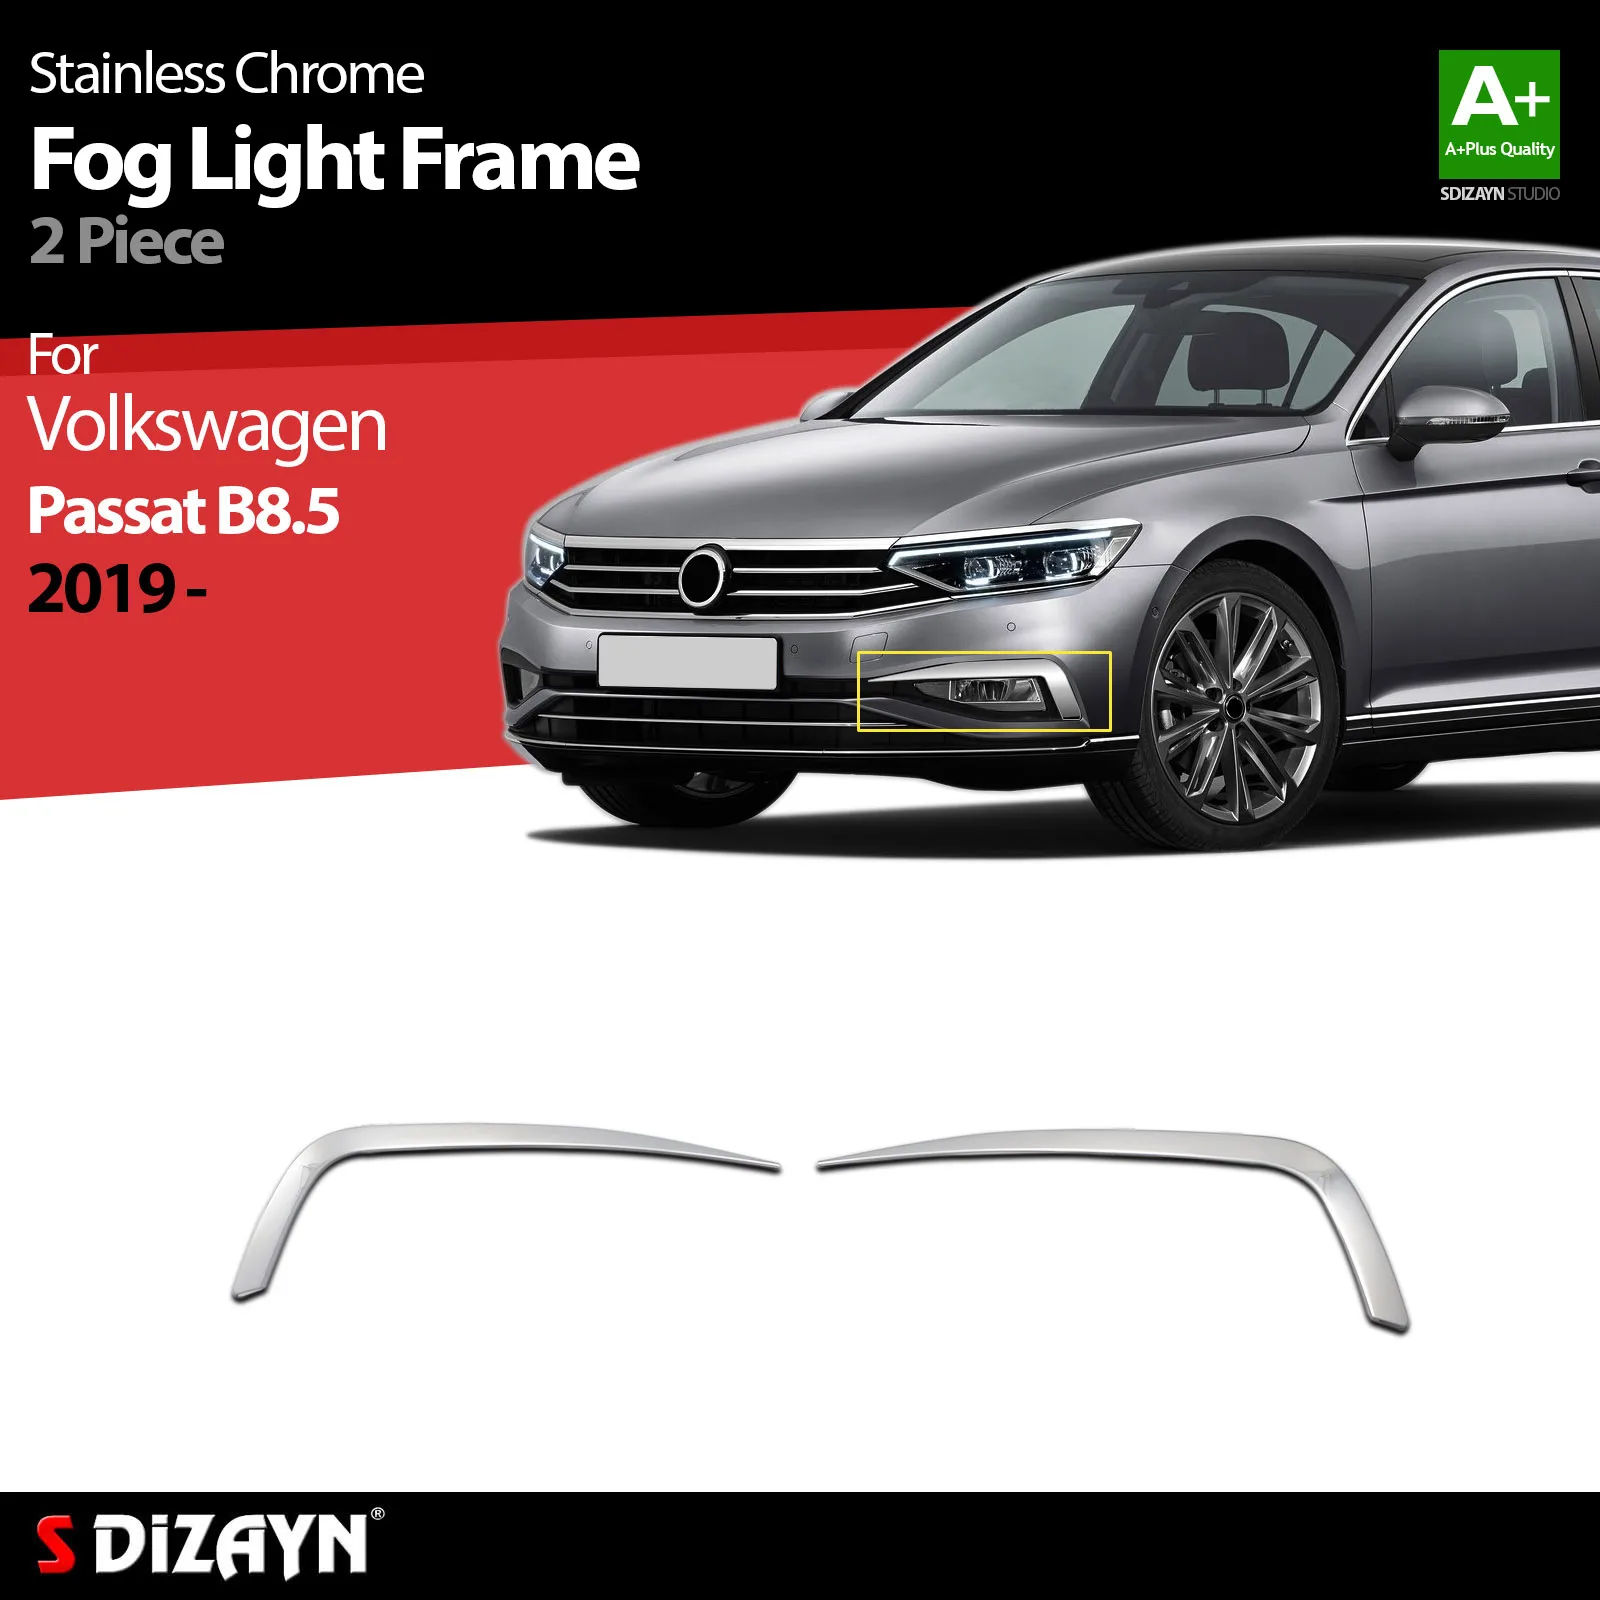 

S Dizayn For Volkswagen Passat B8 Chrome Fog Light Frame Stainless Steel 2 Pcs VW Exterior Car Accessories Parts Auto Products